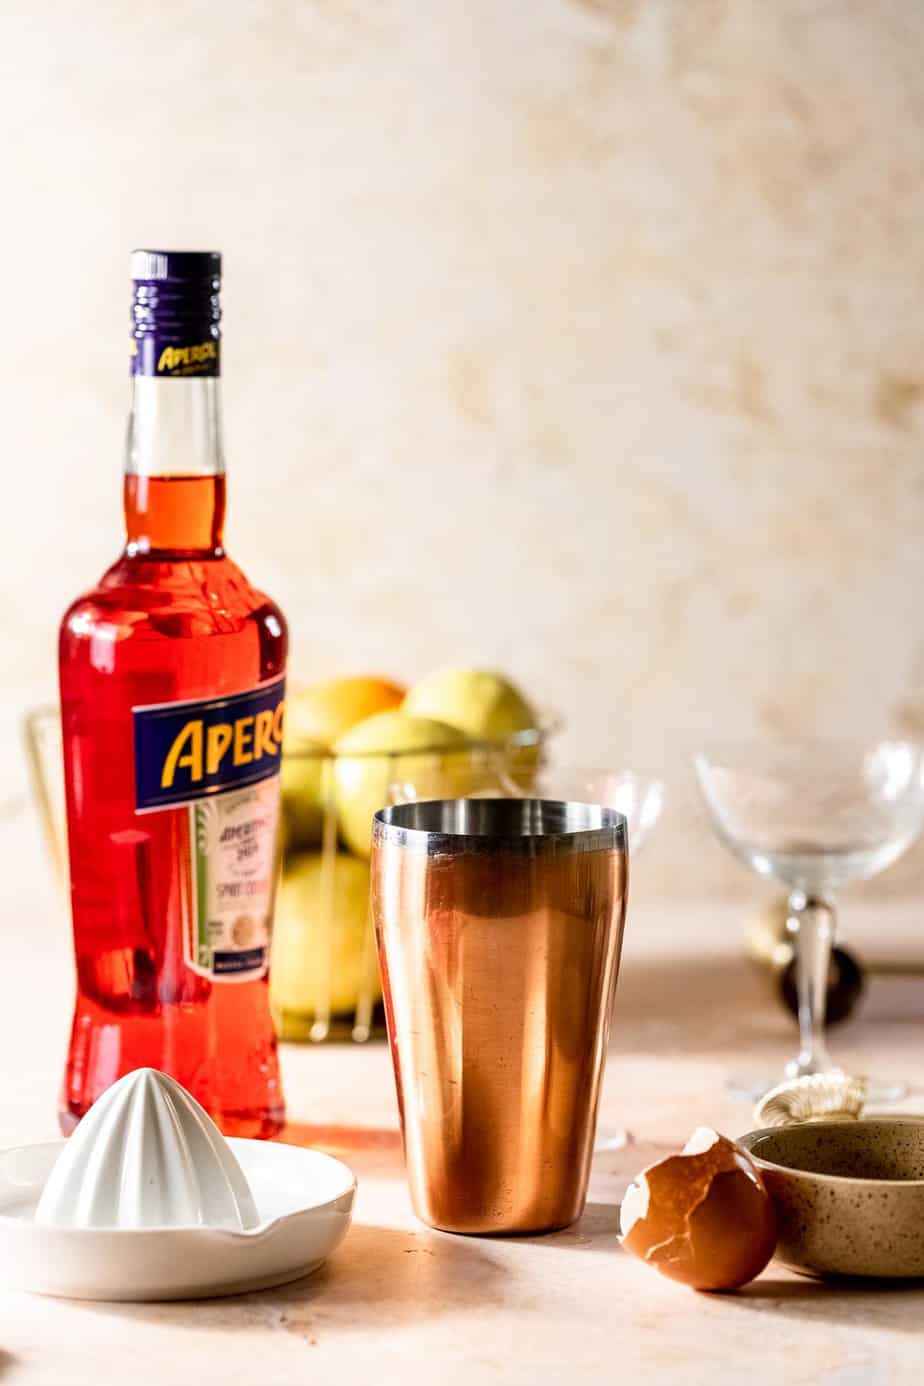 A bottle of Aperol with a cocktail shaker